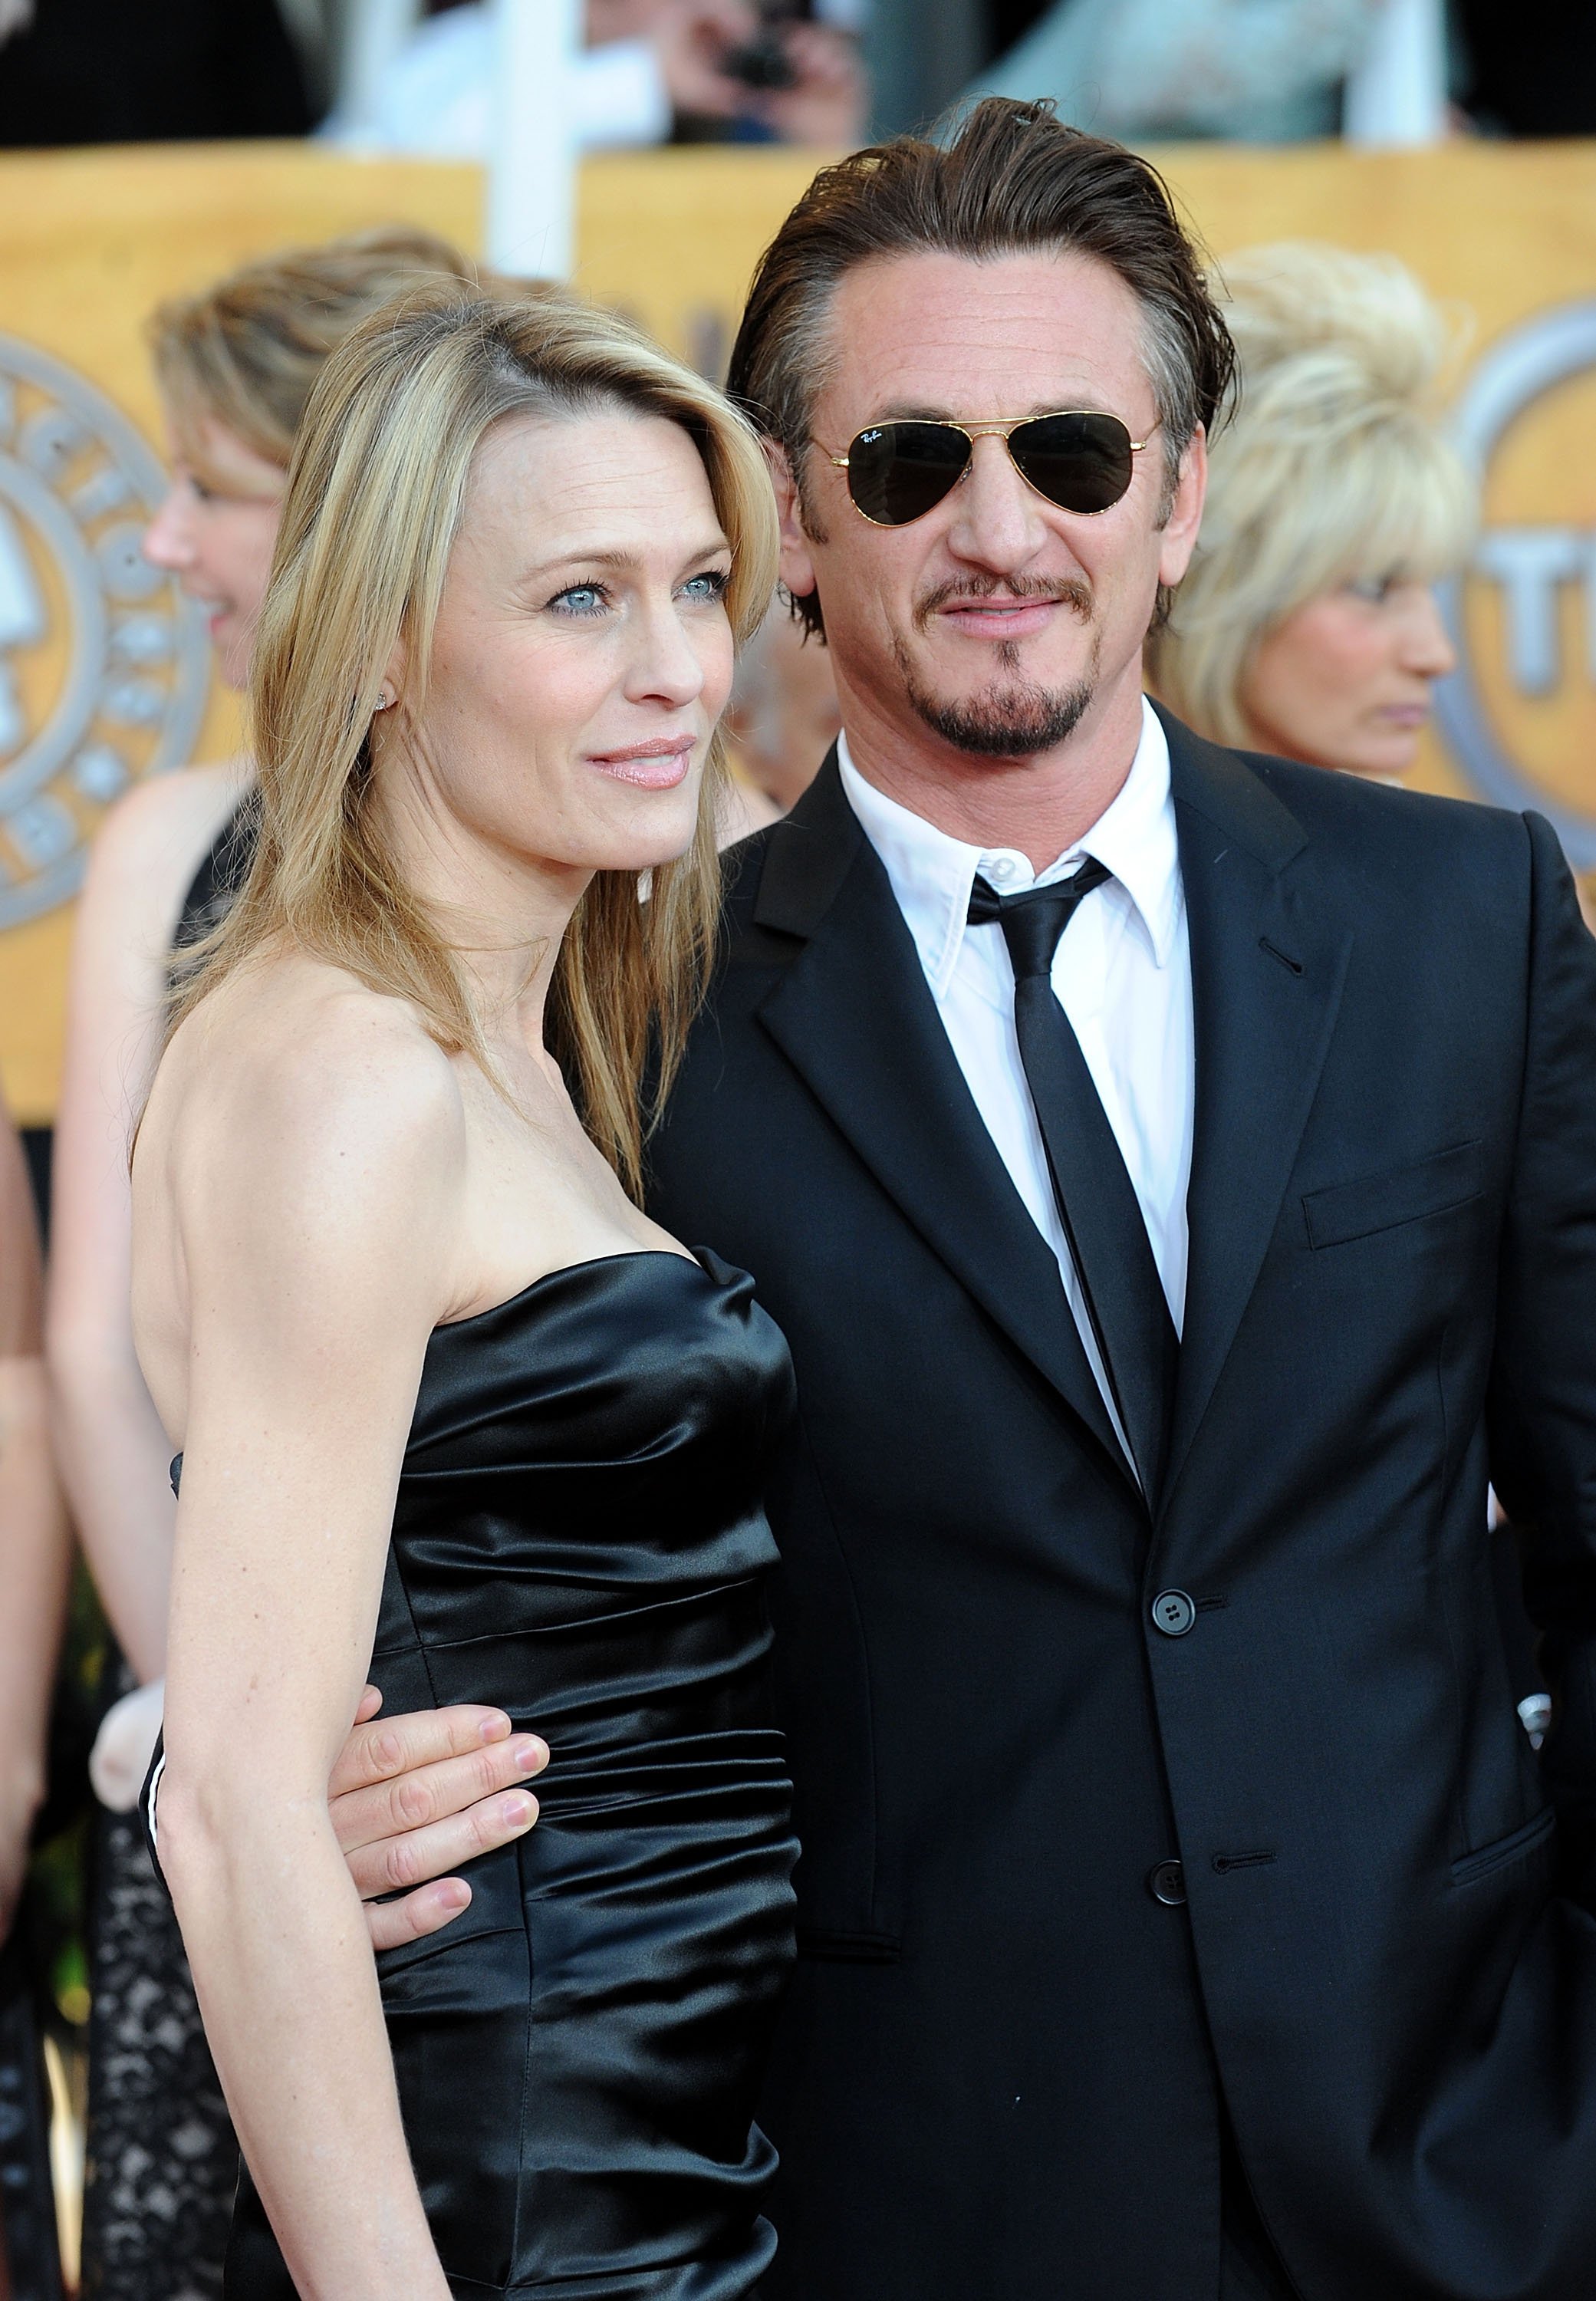 Robin Wright and Sean Penn attend the 15th Annual Screen Actors Guild Awards at the Shrine Auditorium on January 25, 2009 in Los Angeles, California. | Photo: Getty Images